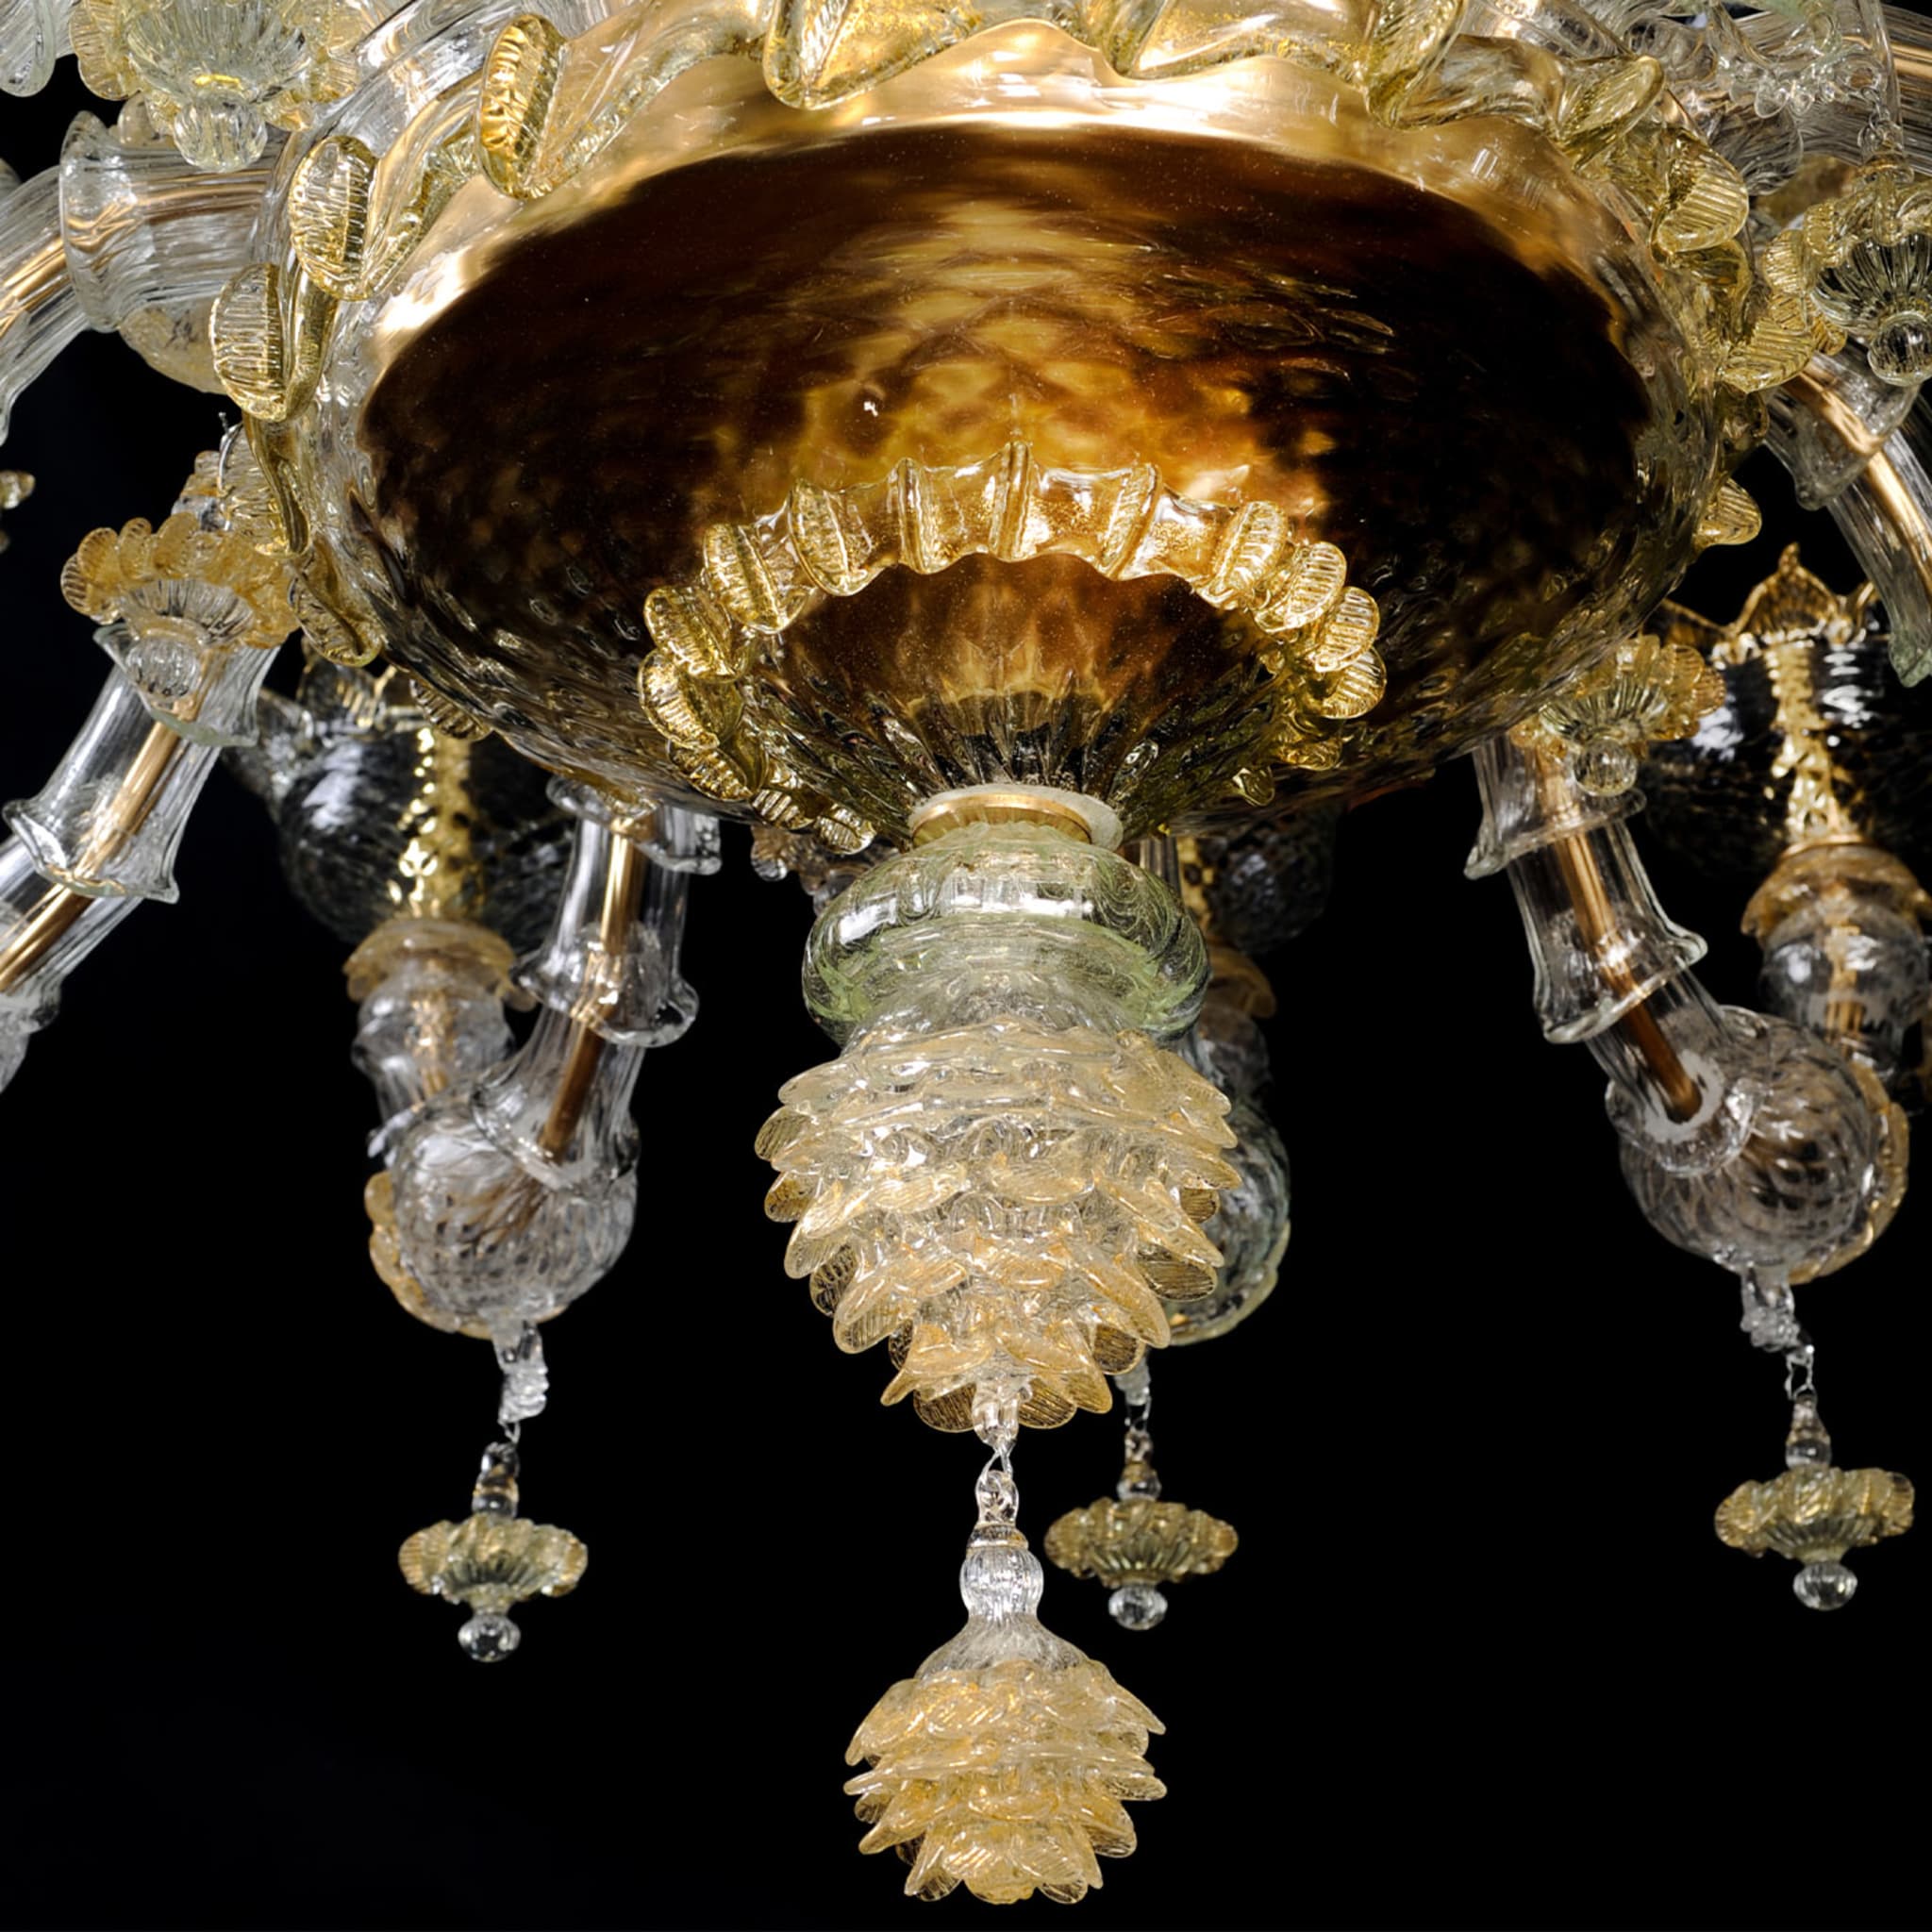 Rezzonico-style Gold and Crystal Chandelier #6 - Alternative view 2